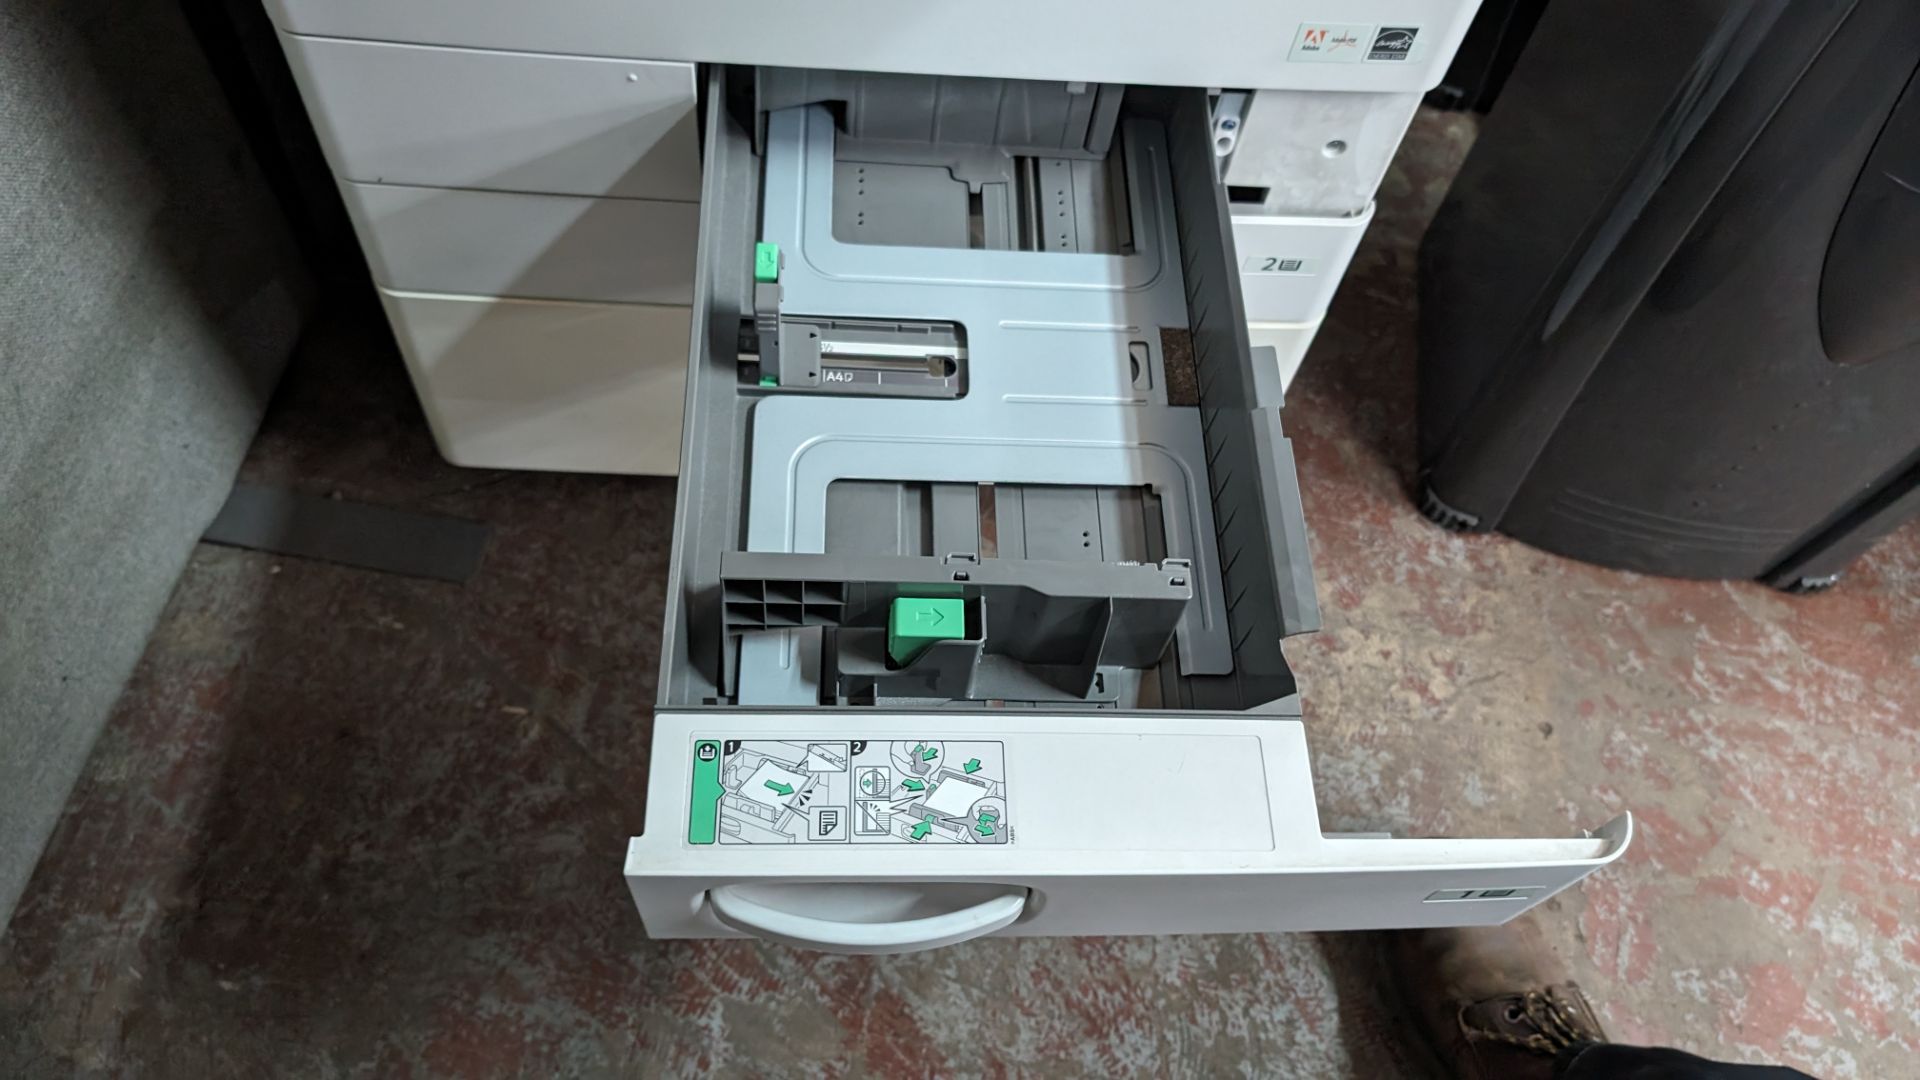 Ricoh MP C3003 floor standing copier with touchscreen controls, ADF, twin paper cassettes & more - Image 10 of 18